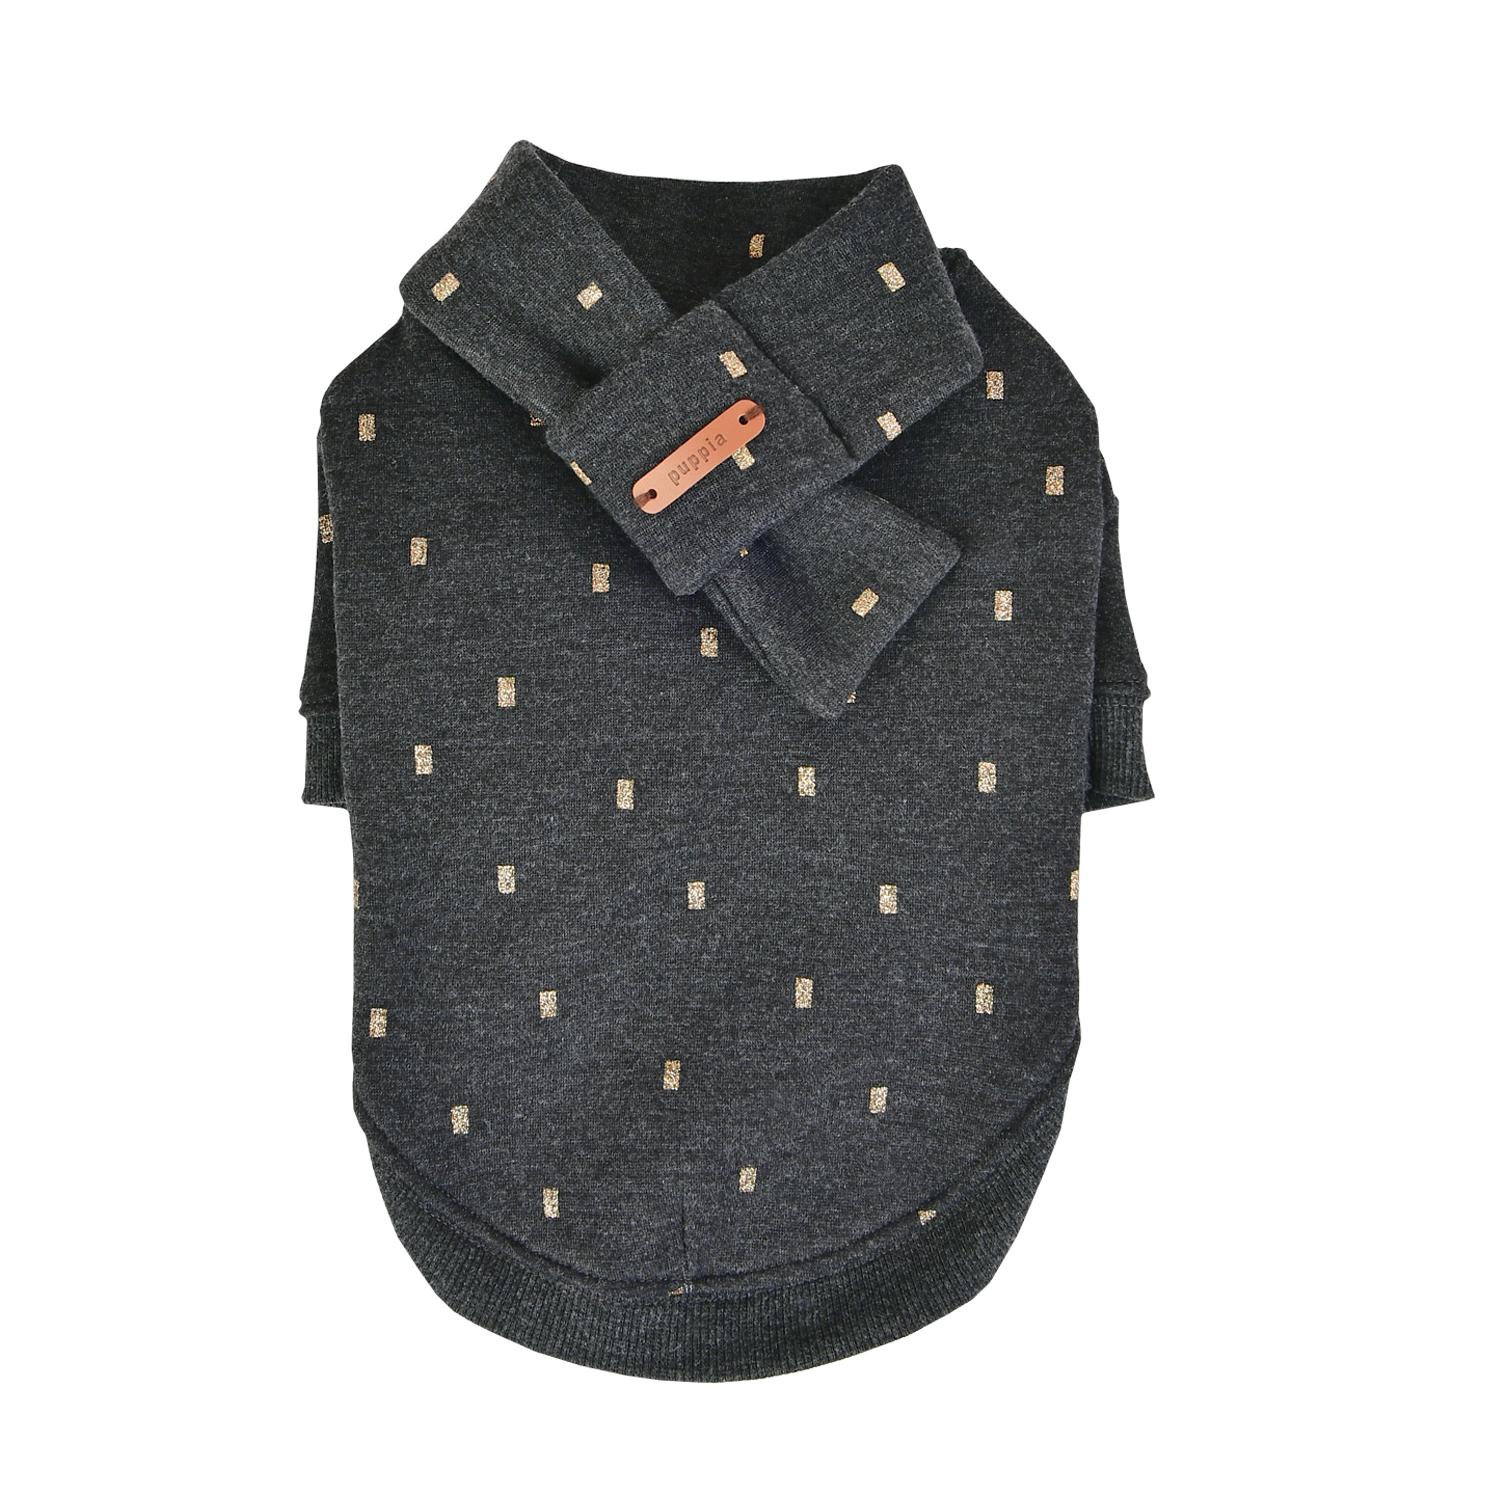 Orabel Dog Shirt by Puppia - Charcoal Gray